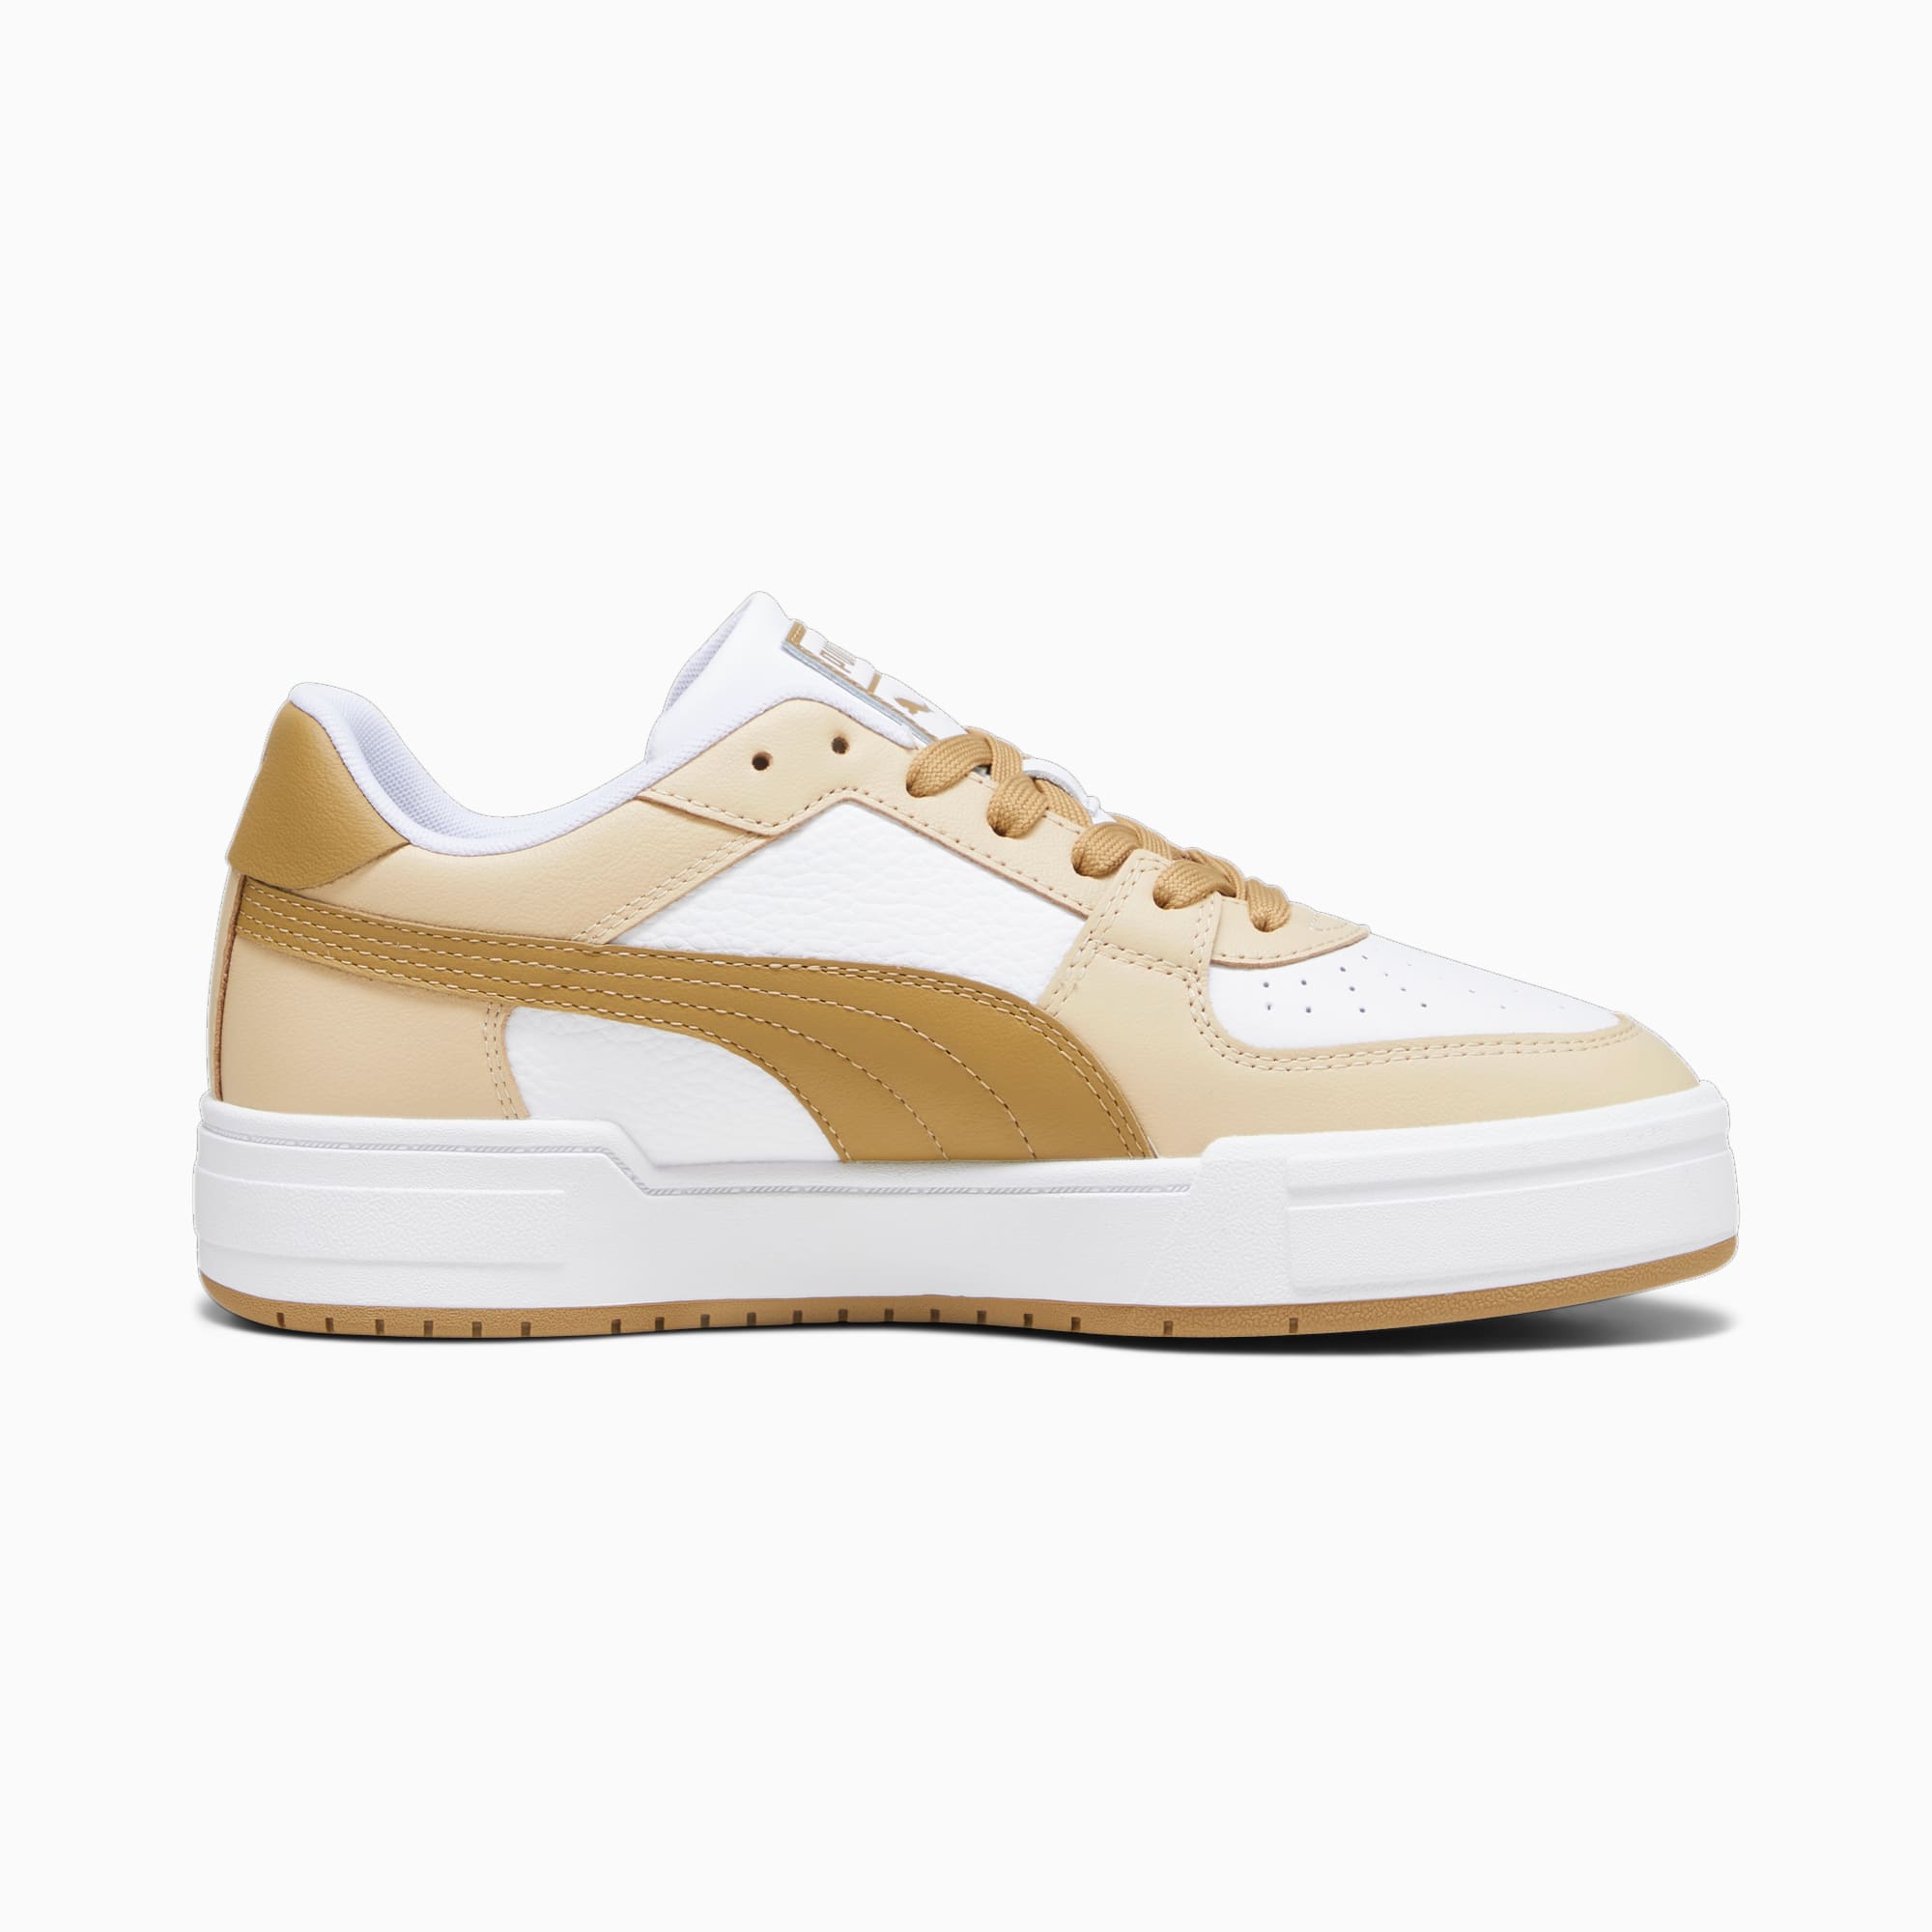 Women's PUMA Ca Pro Classic Trainers, White/Granola/Toasted, Size 51, Shoes